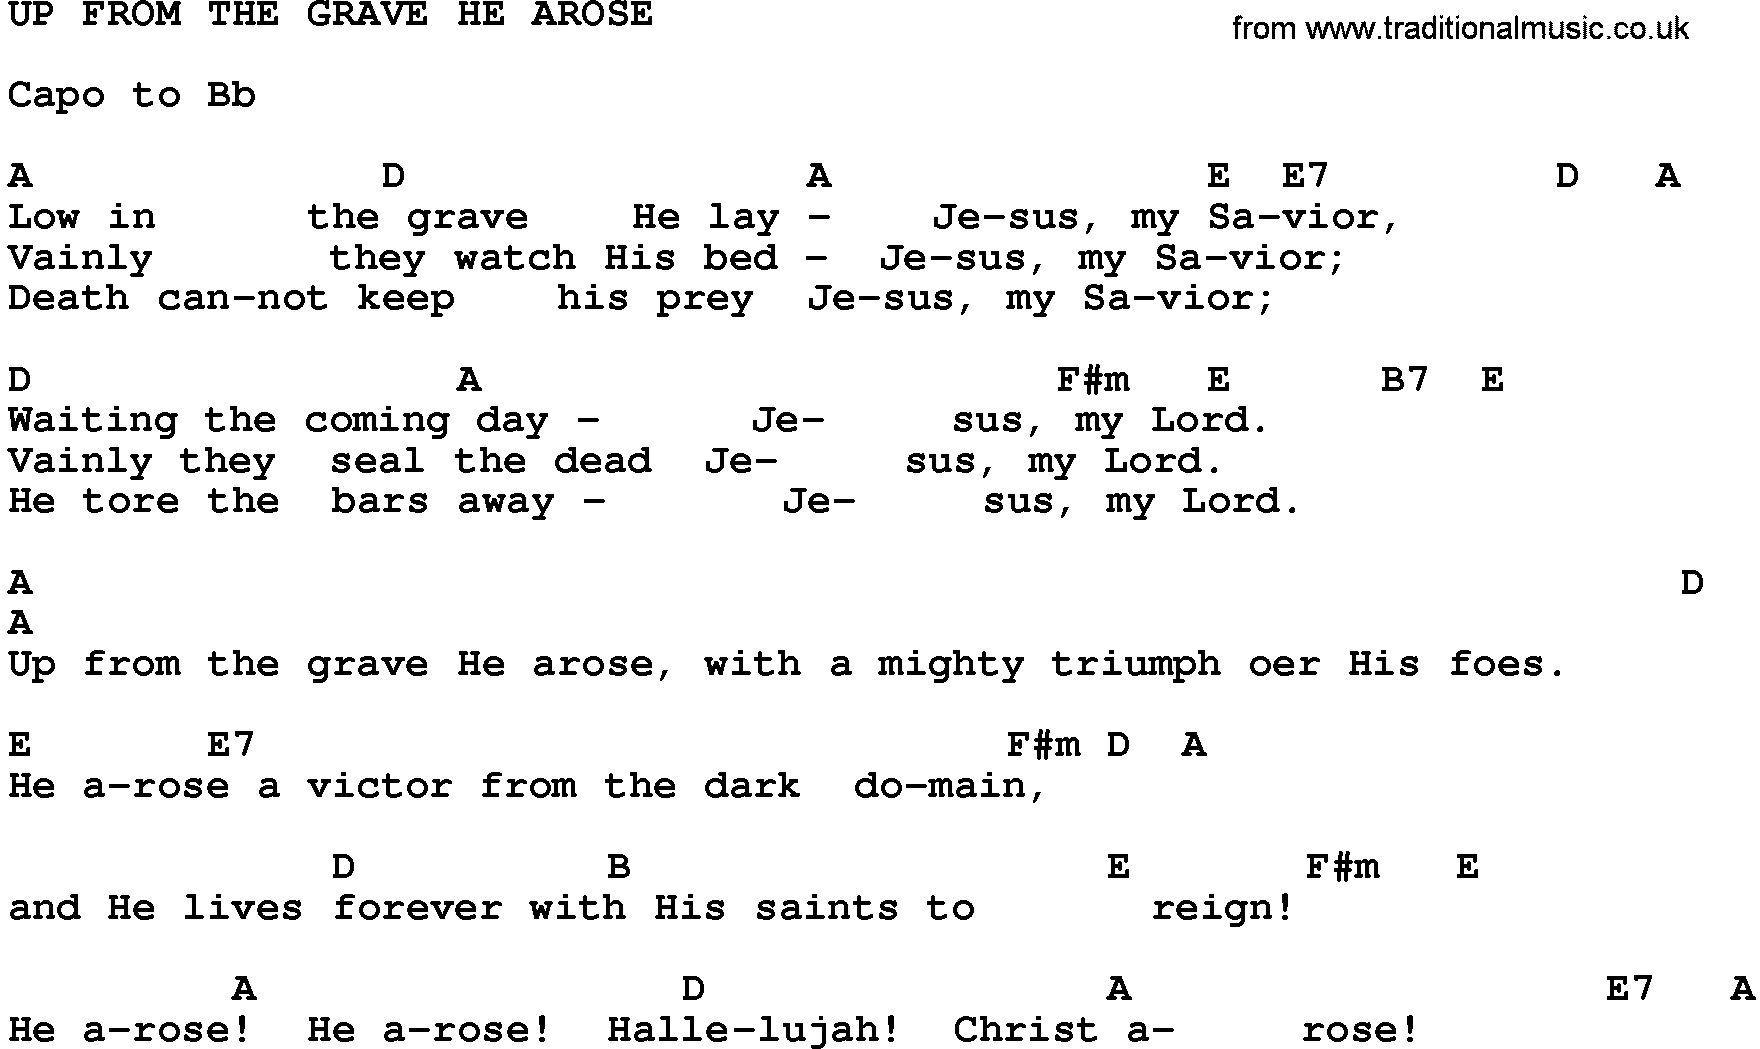 Gospel Song: Low In The Grave (Up From The Grave)-Trad, lyrics and chords.